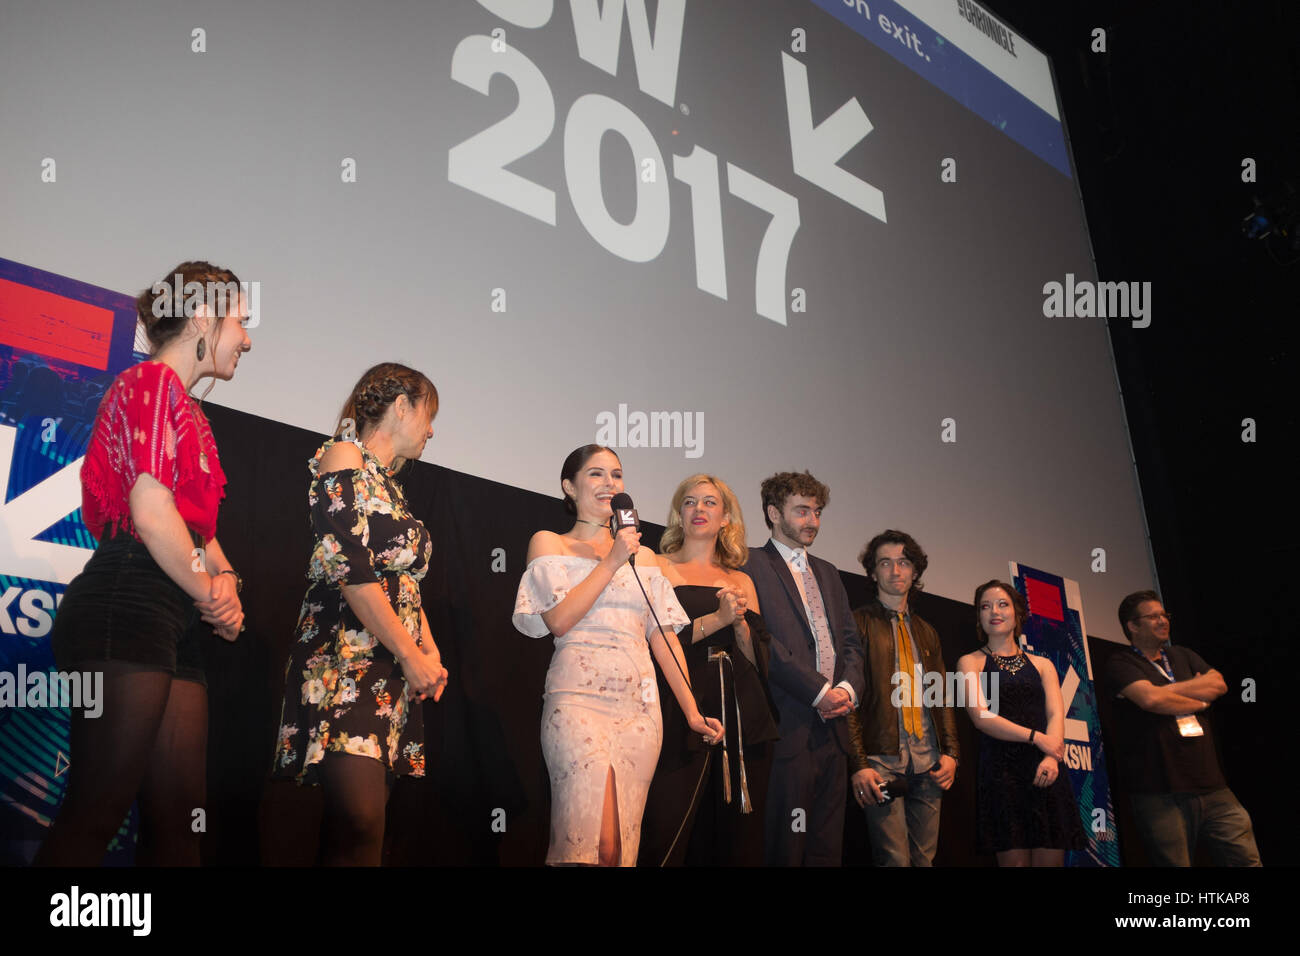 Austin, Texas, USA. 12th March 2017. OLIVIA APPLEGATE leads a Q and A after the world premiere of the Honor Farm at the Stateside Theater during SXSW Austin, Texas Credit: Sandy Carson/ZUMA Wire/Alamy Live News Stock Photo